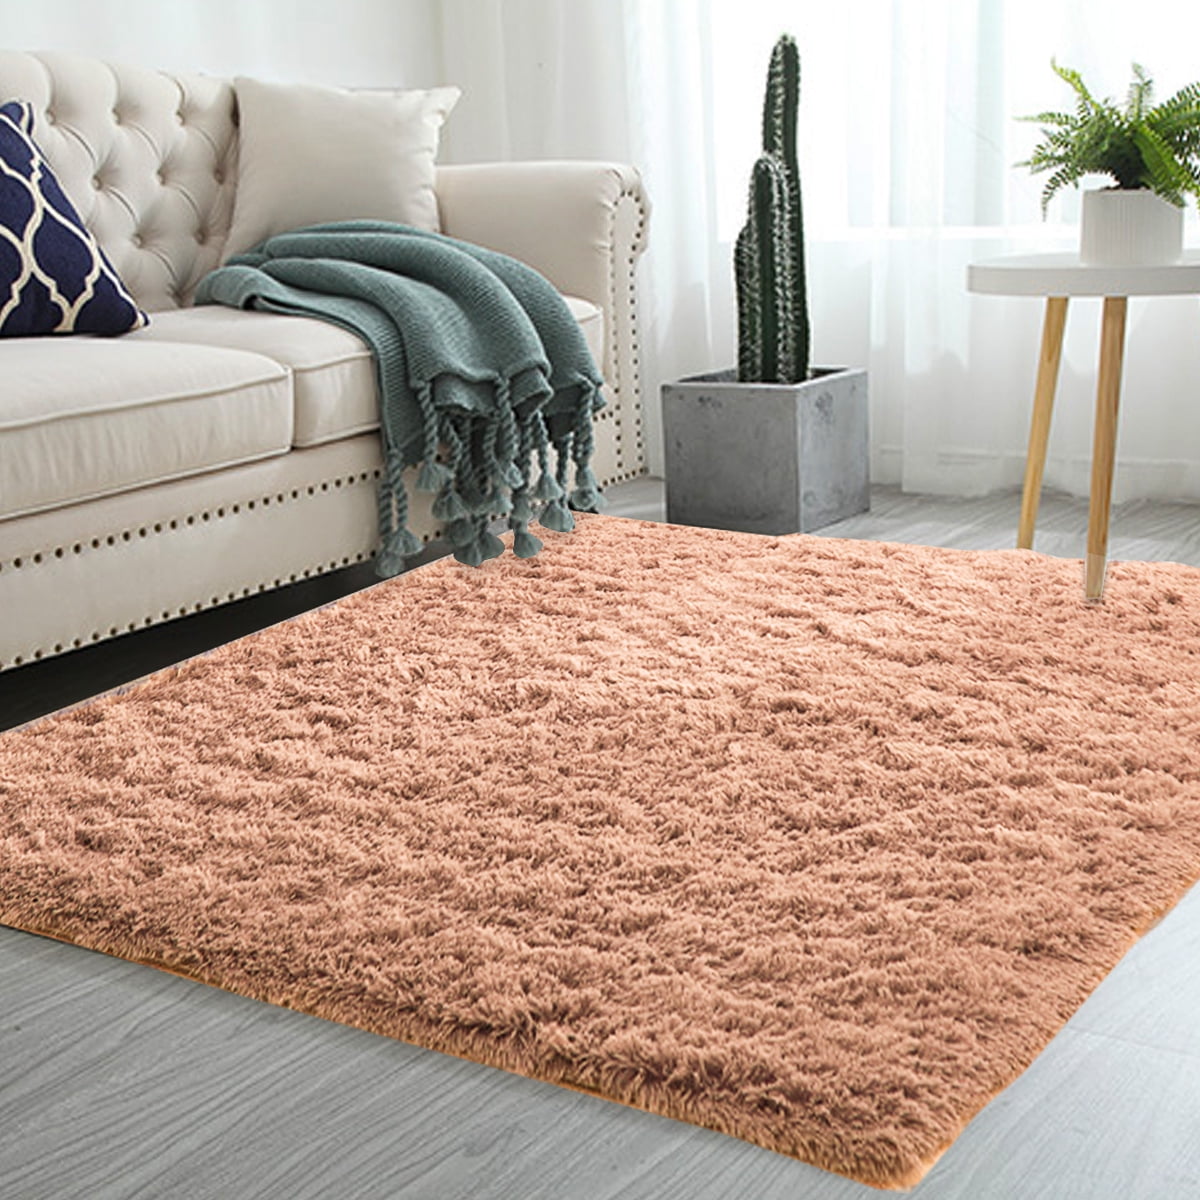 Shaggy  Bedroom  Home  Anti-Skid  Fluffy  Rugs  Dining  Room  Rug  Area  Carpet 